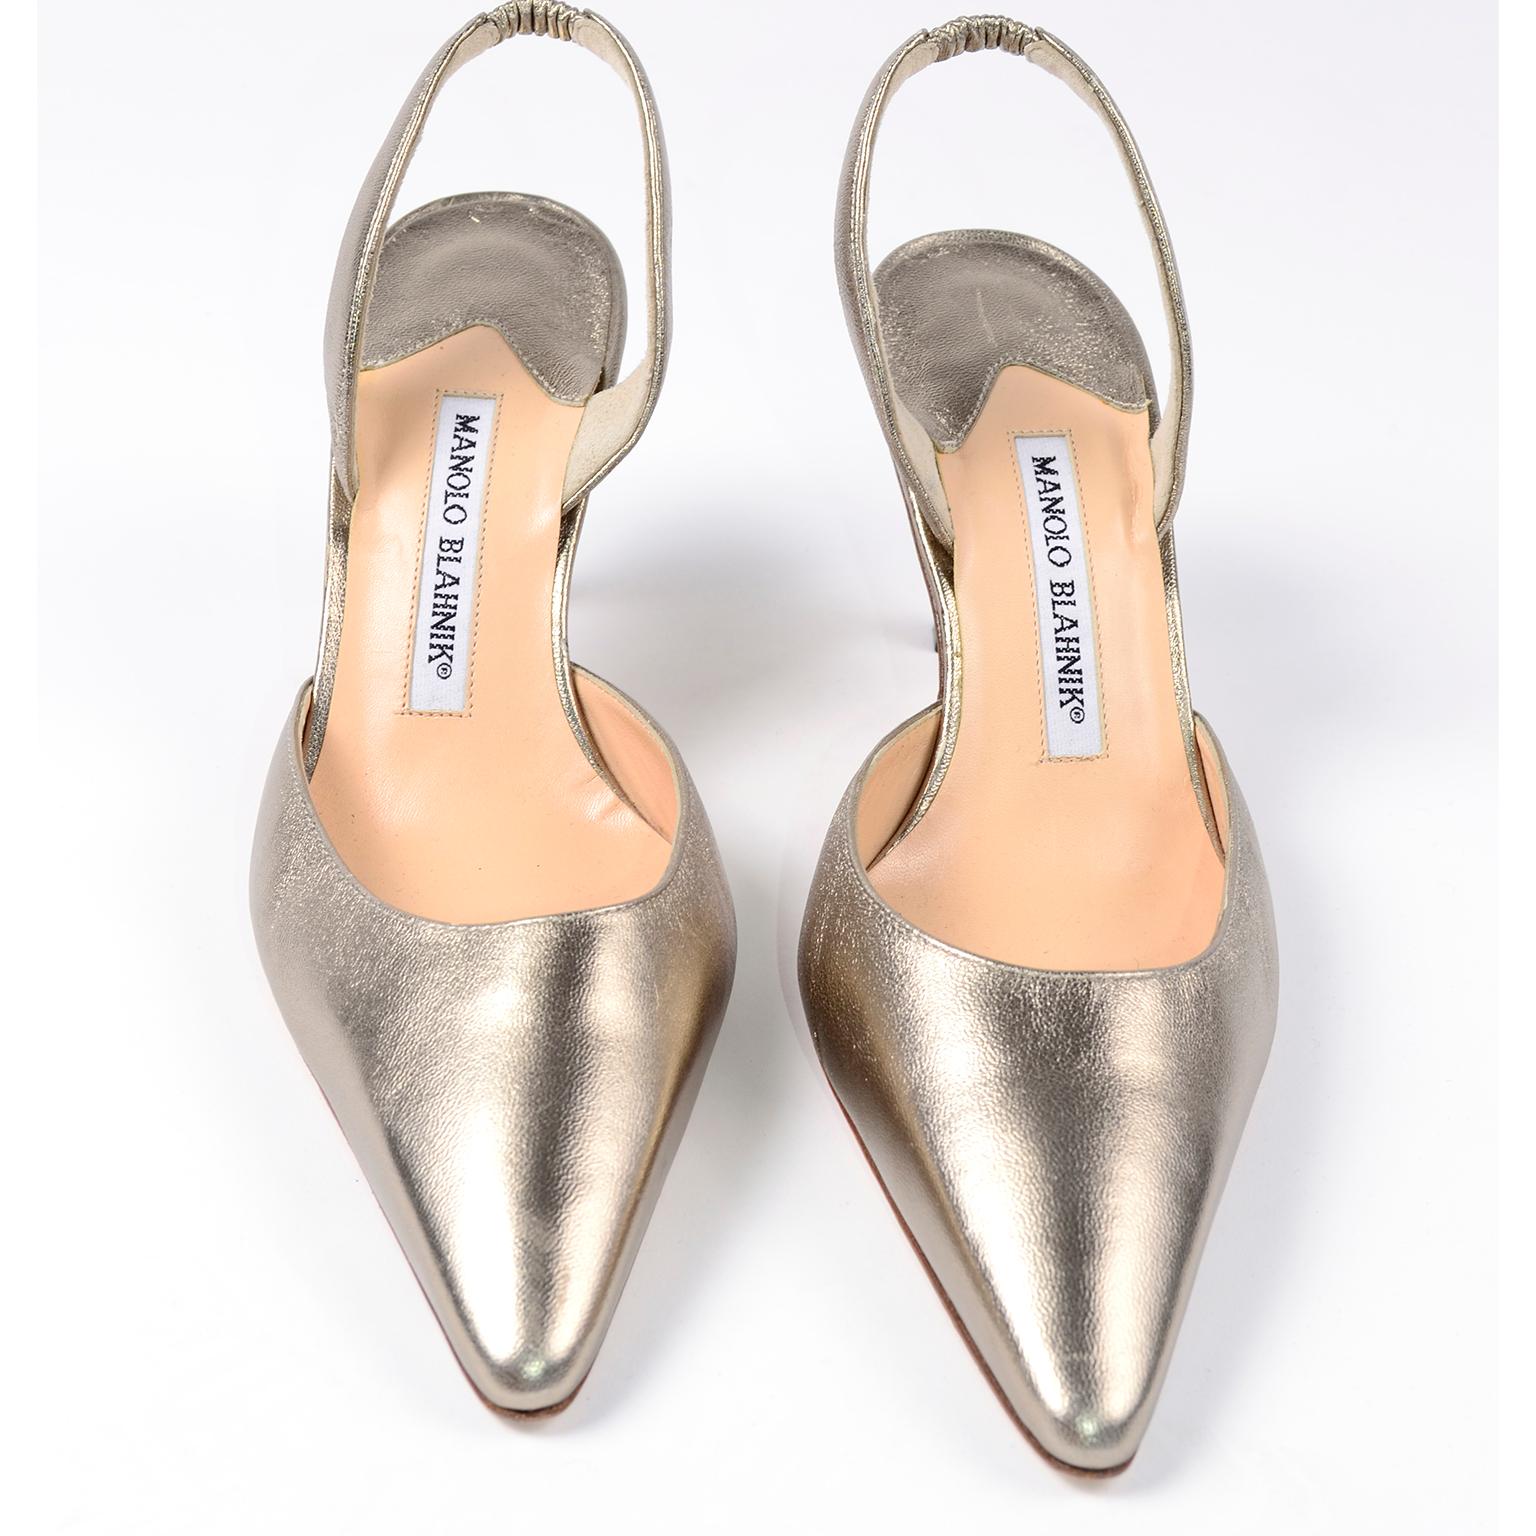 Manolo Blahniks make all feet look beautiful! These classic Carolyn style slingbacks are no exception, with the perfectly pointed toe and perfect heel. These are a metallic soft gold color leather, with never worn leather soles. They were hand made